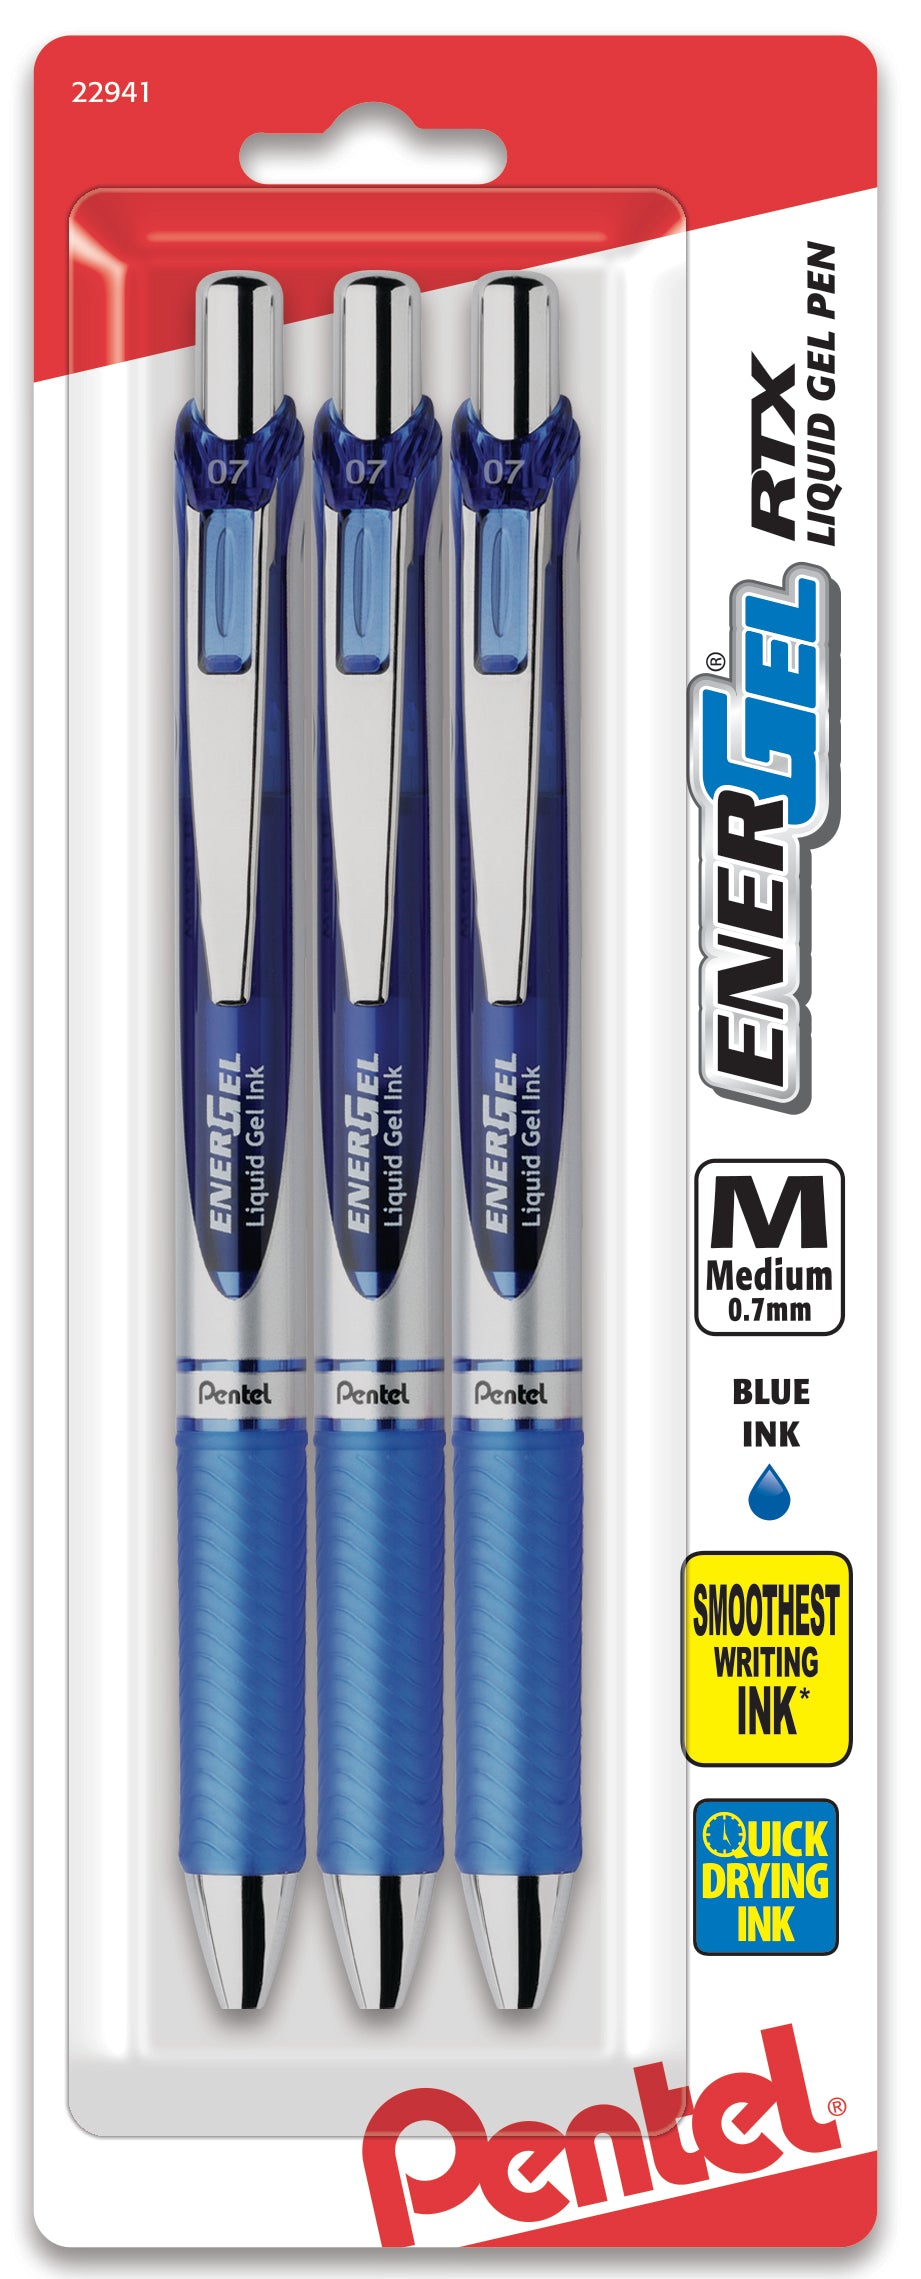 White Gel Pen for Artists 0.7mm Fine Point - Smudge-resistant for